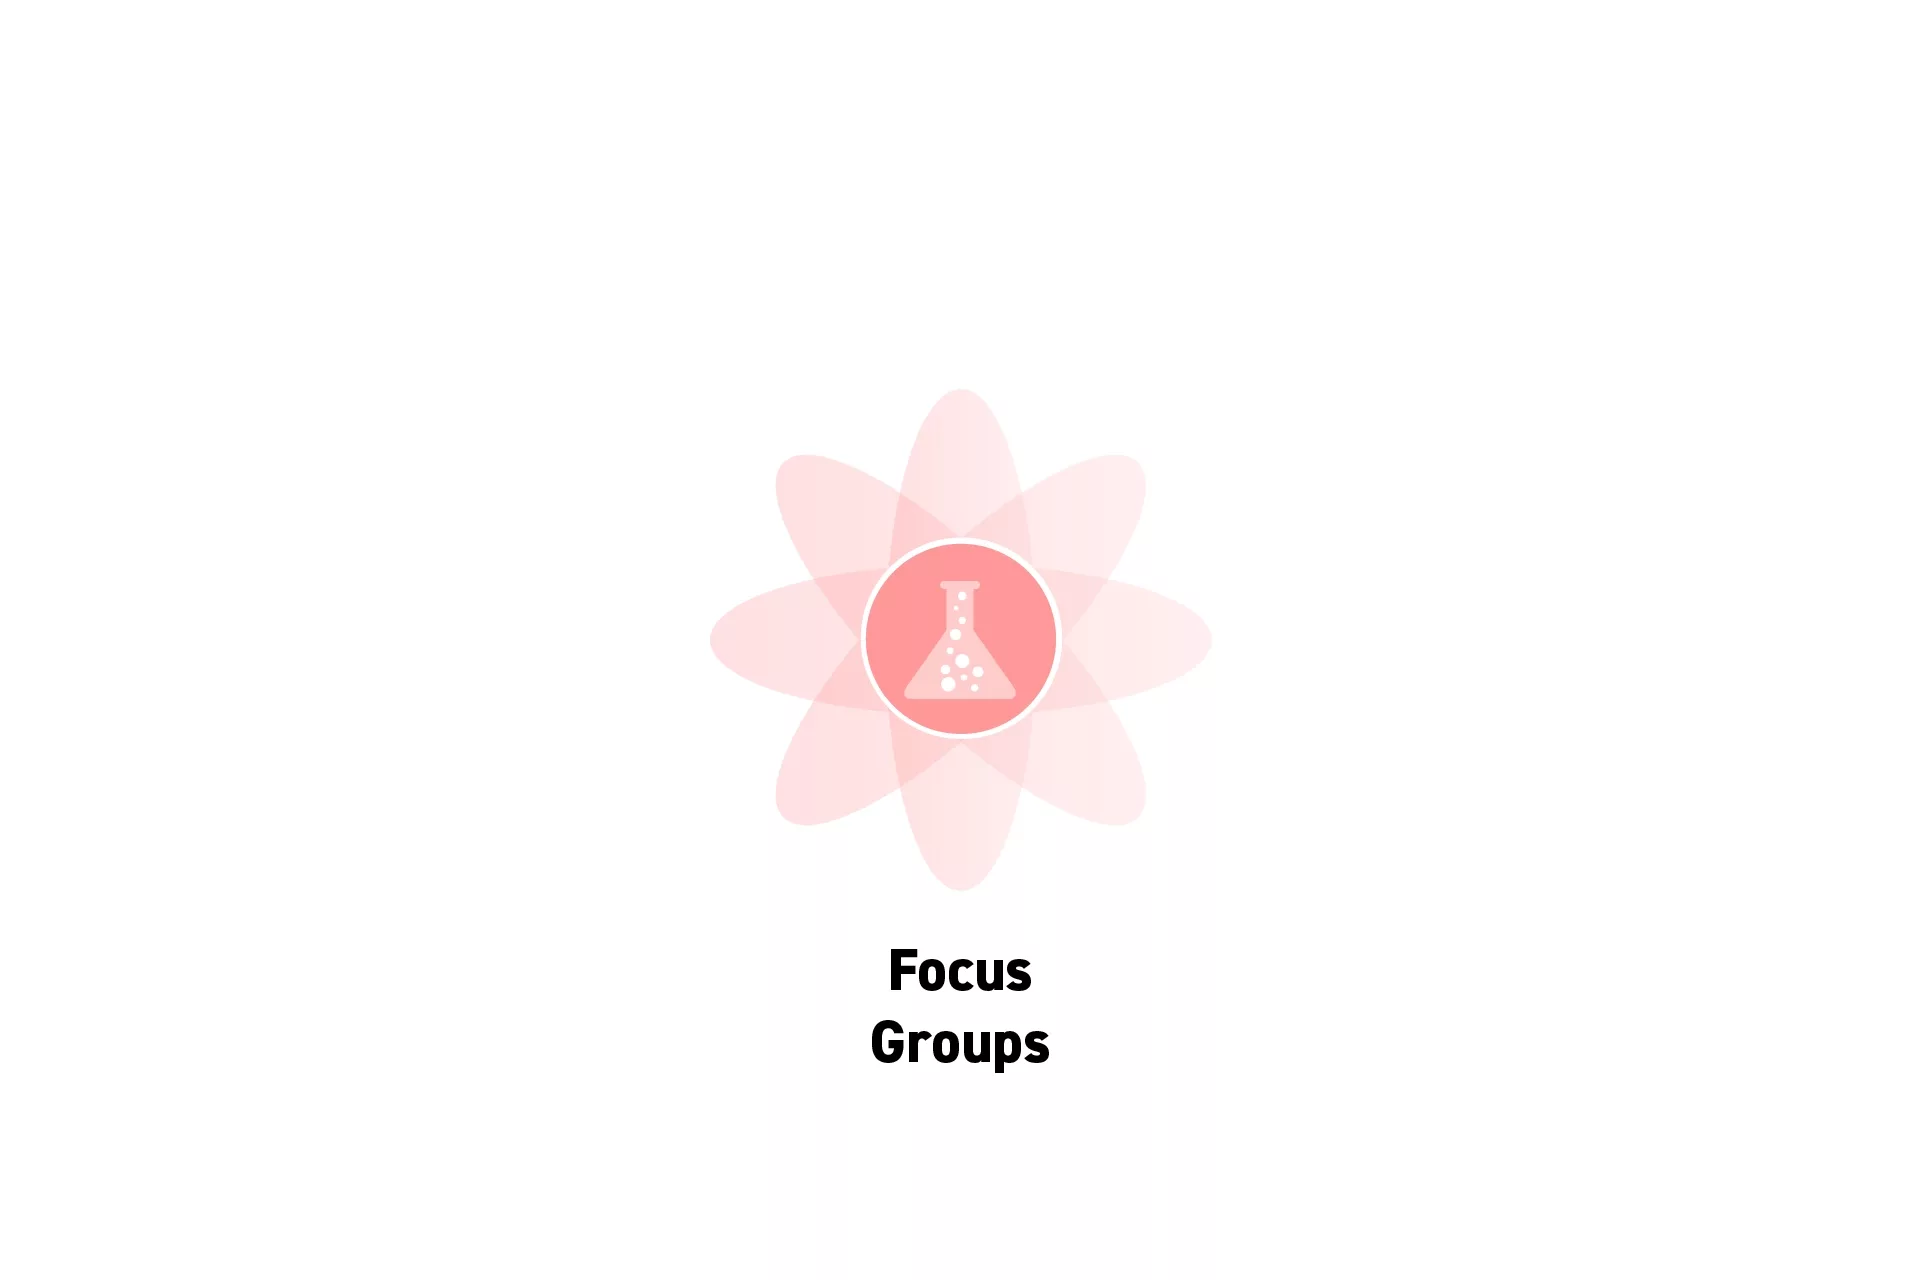 A flower that represents Strategy with the text “Focus Groups” beneath it.